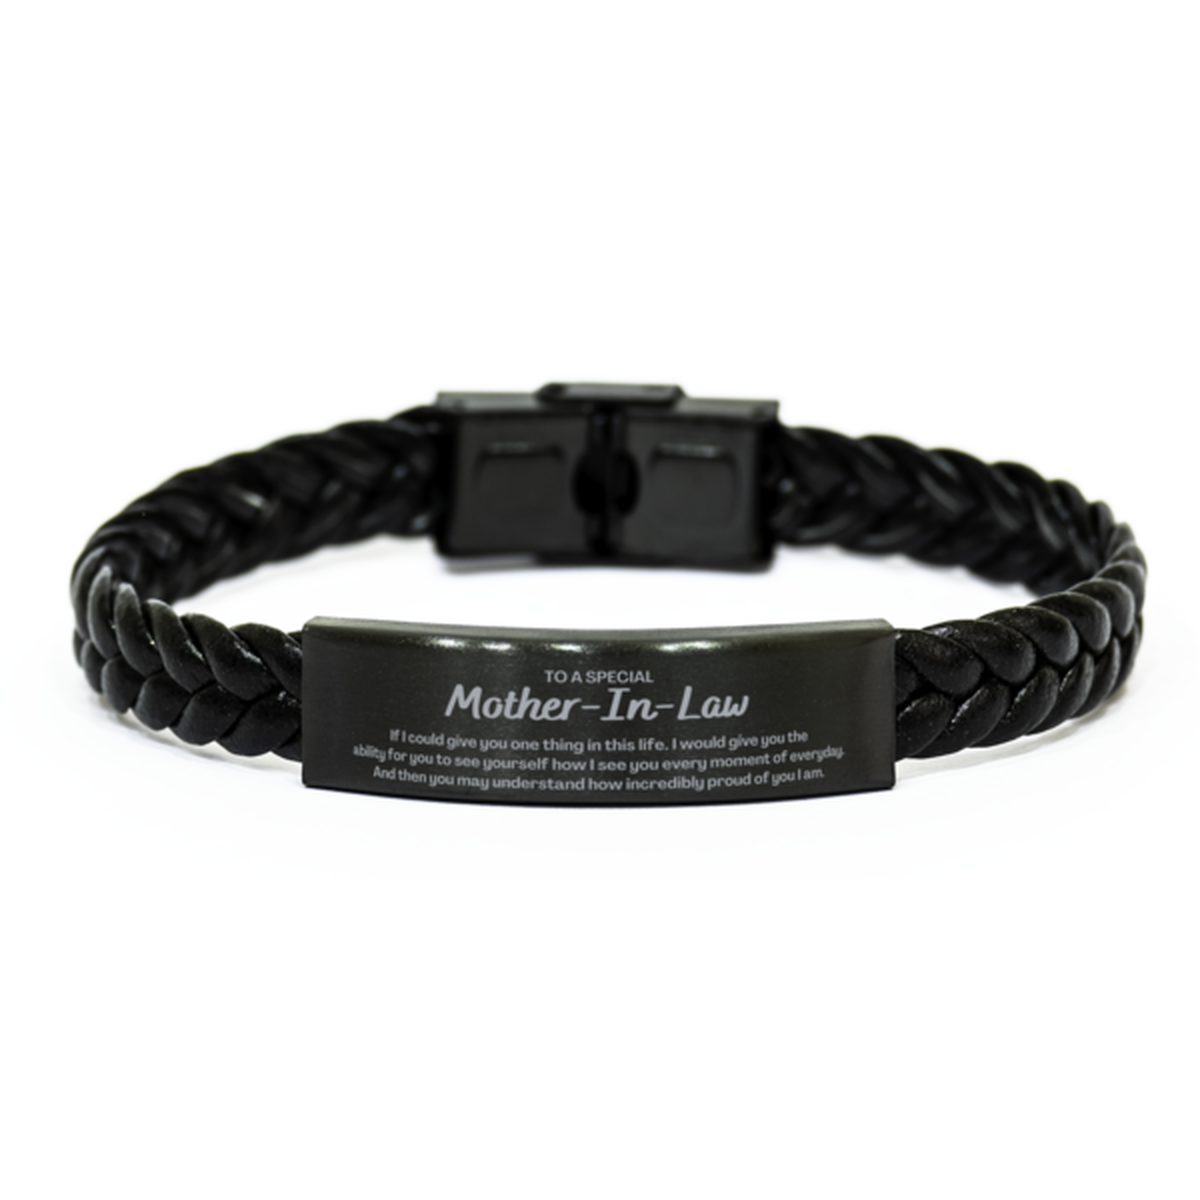 To My Mother-In-Law Braided Leather Bracelet, Gifts For Mother-In-Law Engraved, Inspirational Gifts for Christmas Birthday, Epic Gifts for Mother-In-Law To A Special Mother-In-Law how incredibly proud of you I am